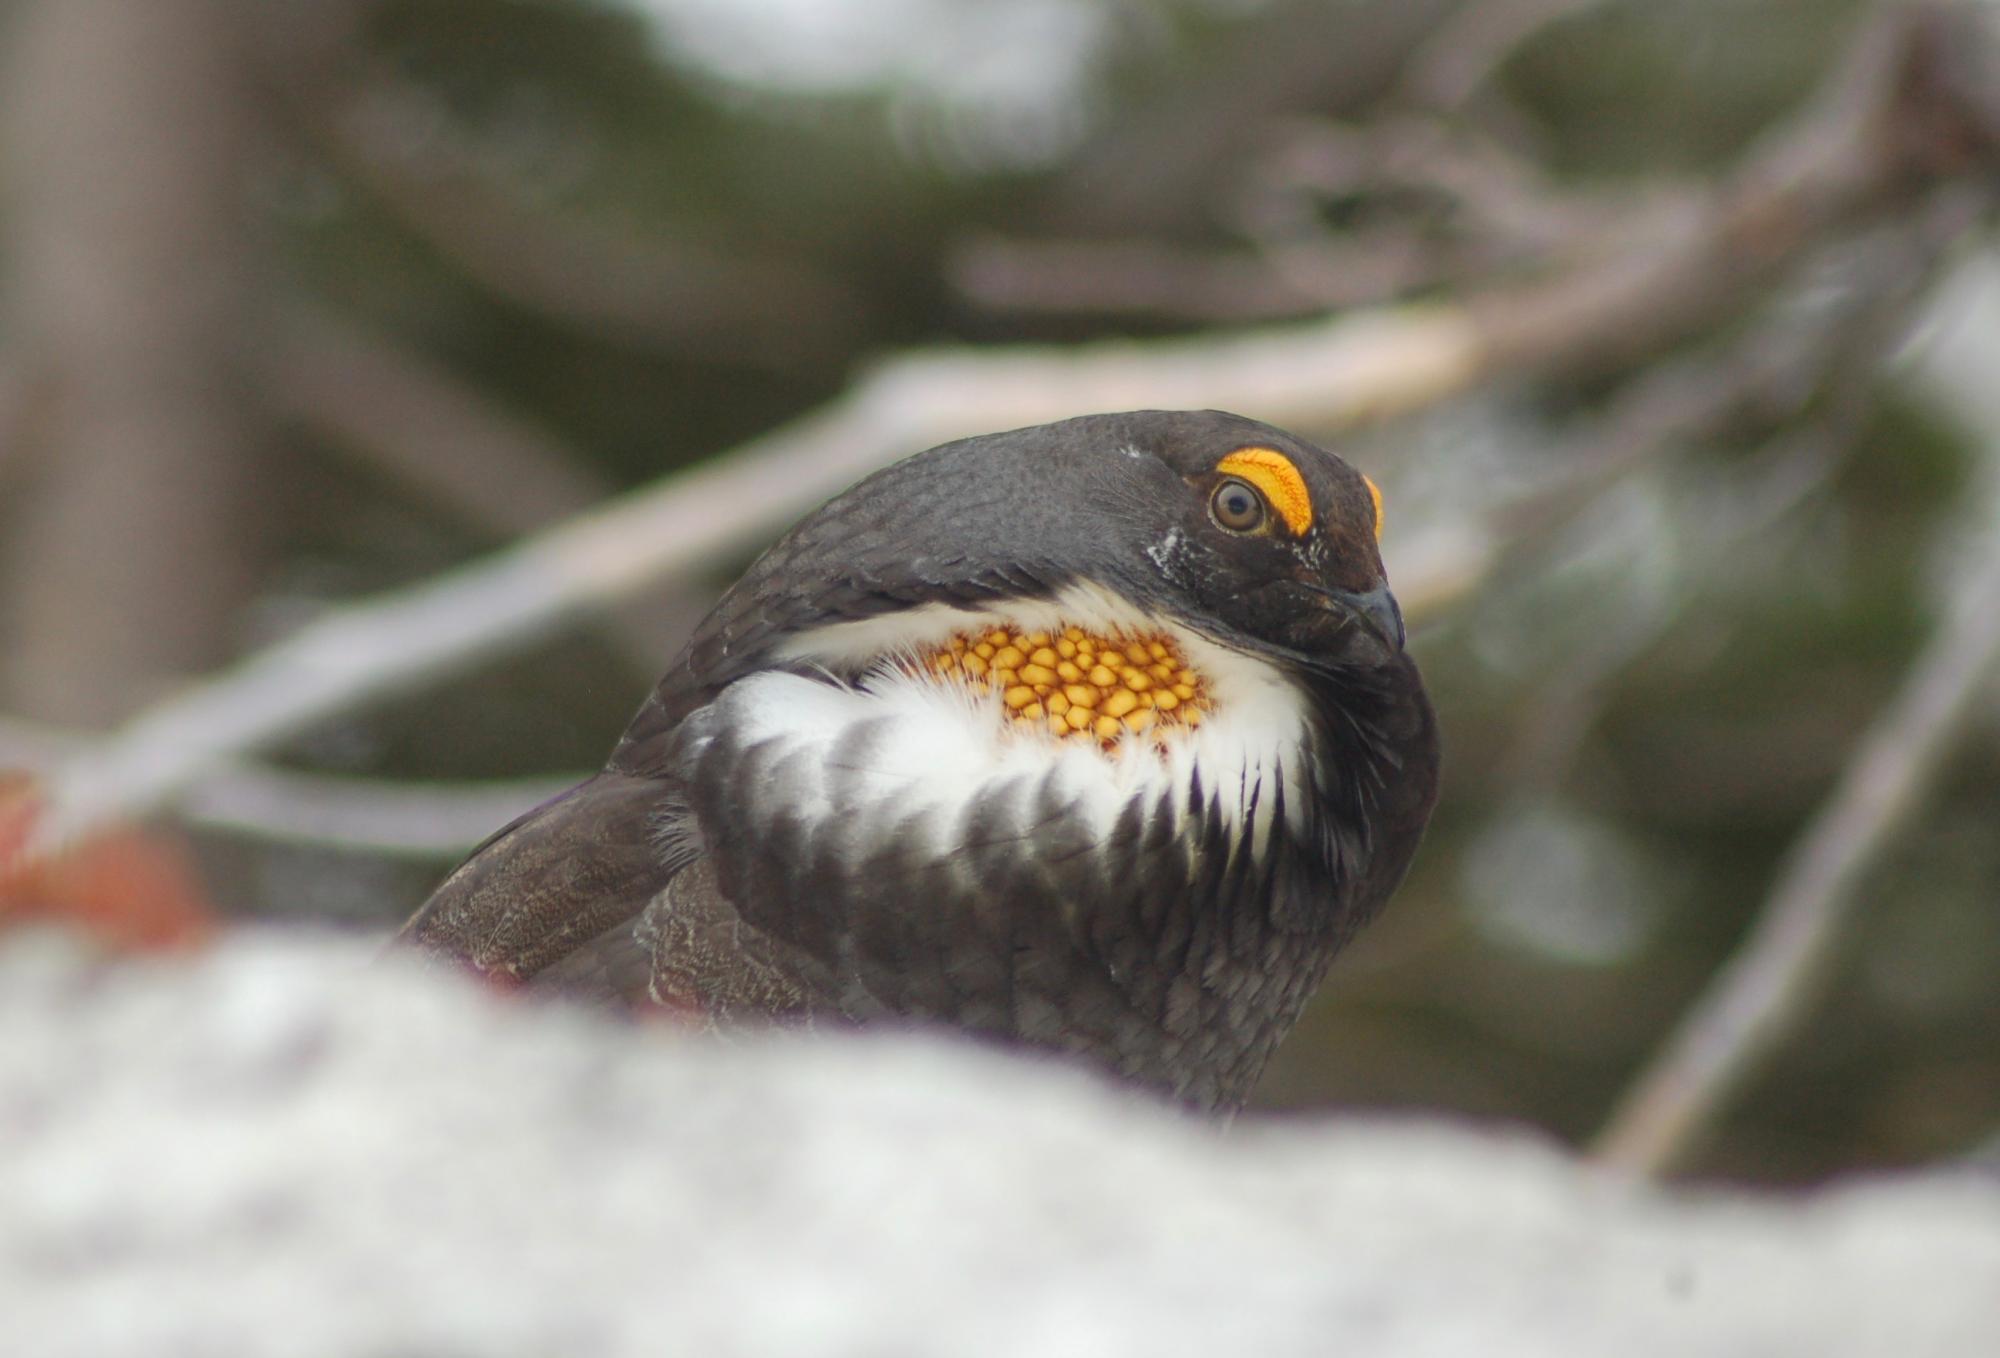 Coloration in birds is produced by both structural coloration in feathers and pigmentation, as seen in this mountain grouse in Olympic National Park.